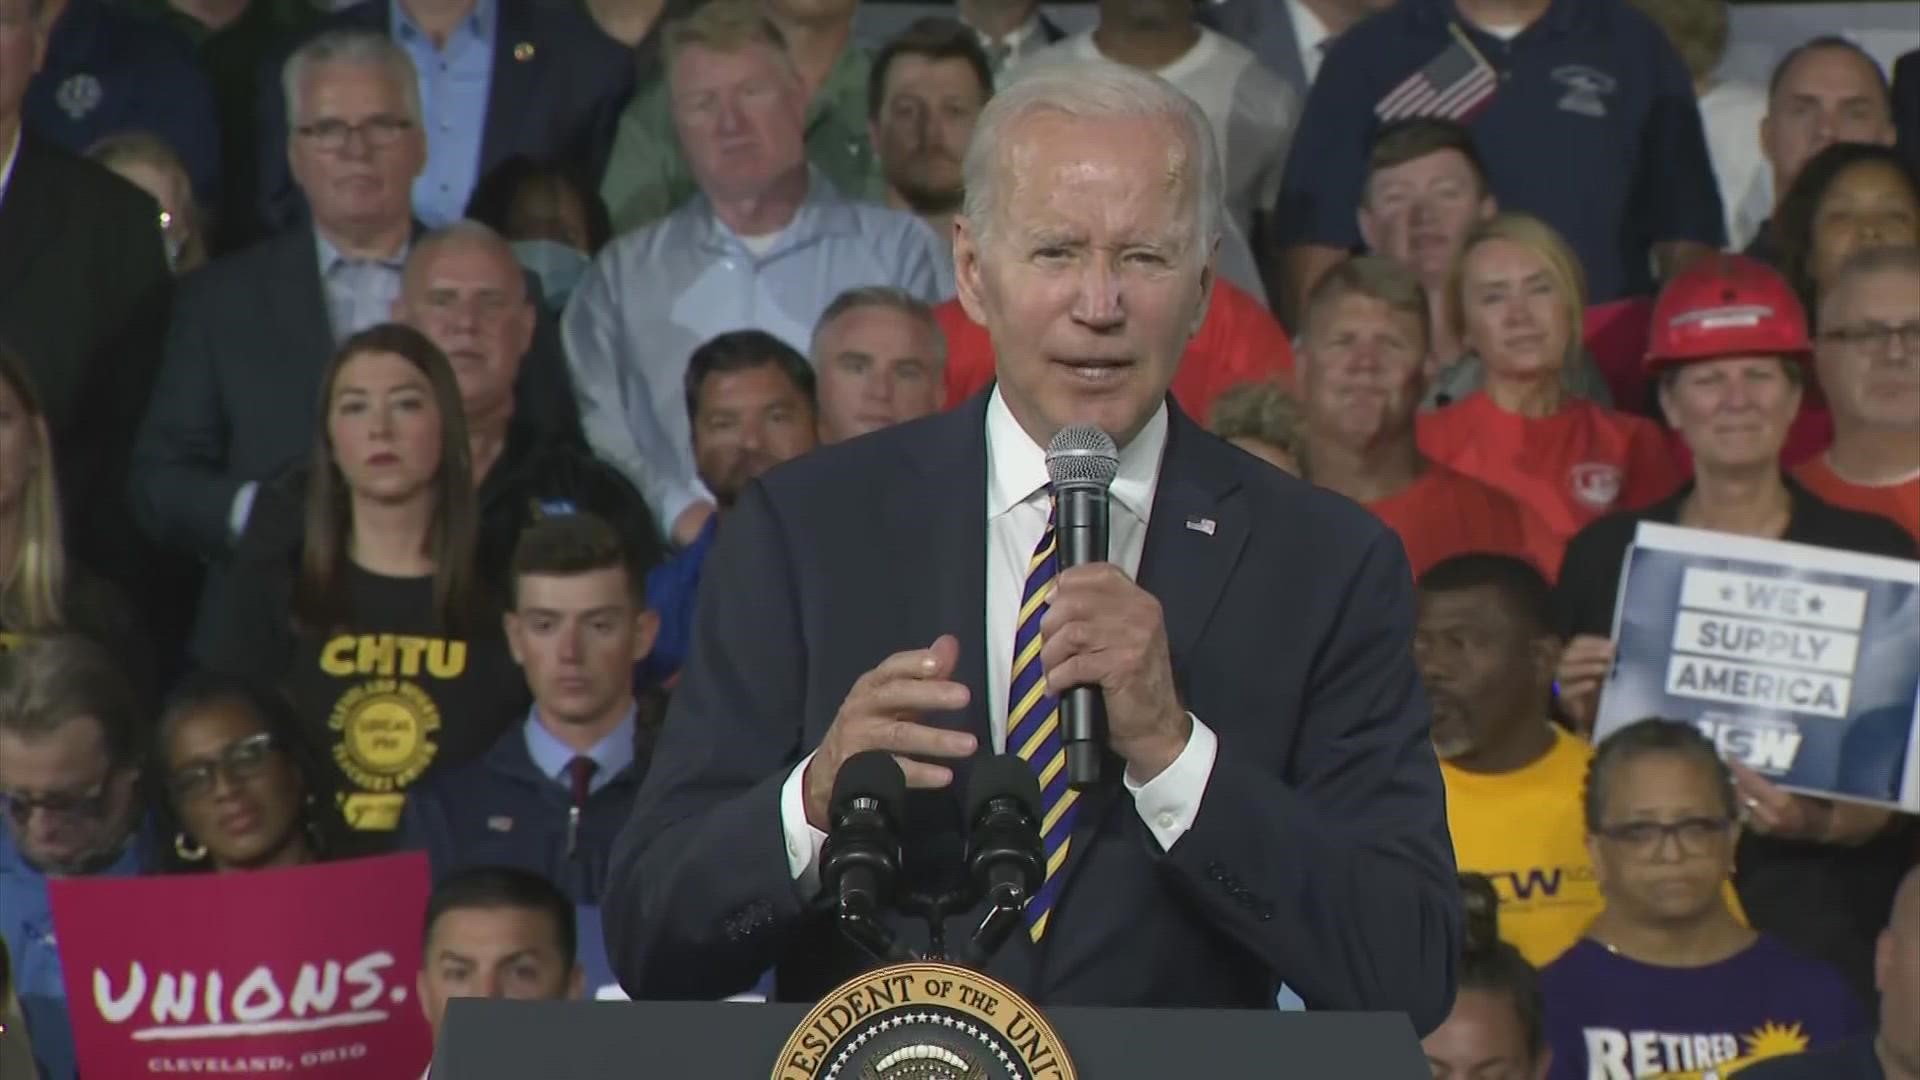 President Joe Biden visited Ohio iron workers to highlight federal action to shore up troubled pension funding for millions now on the job or retired.